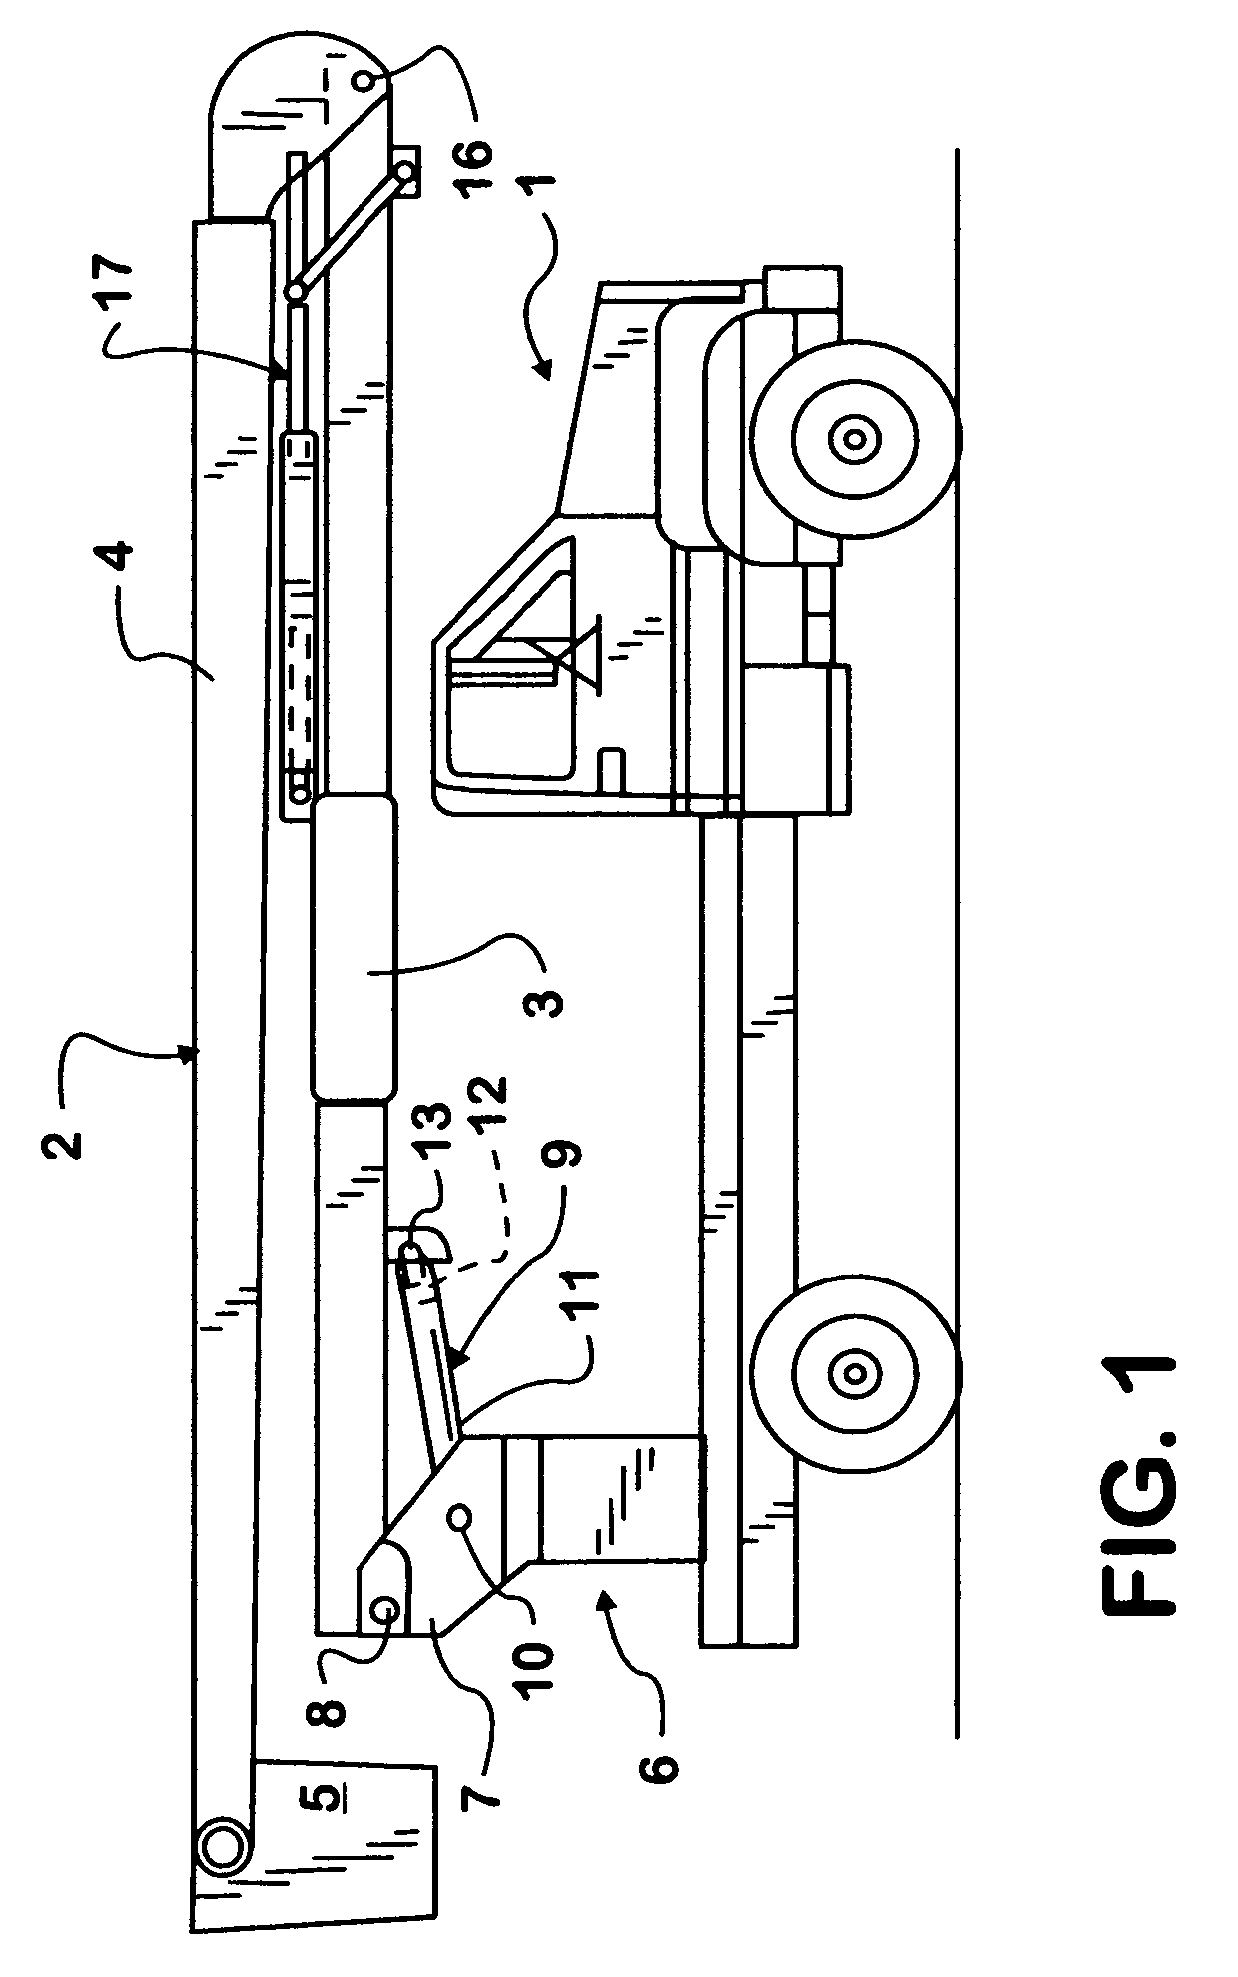 System for integrating body equipment with a vehicle hybrid powertrain